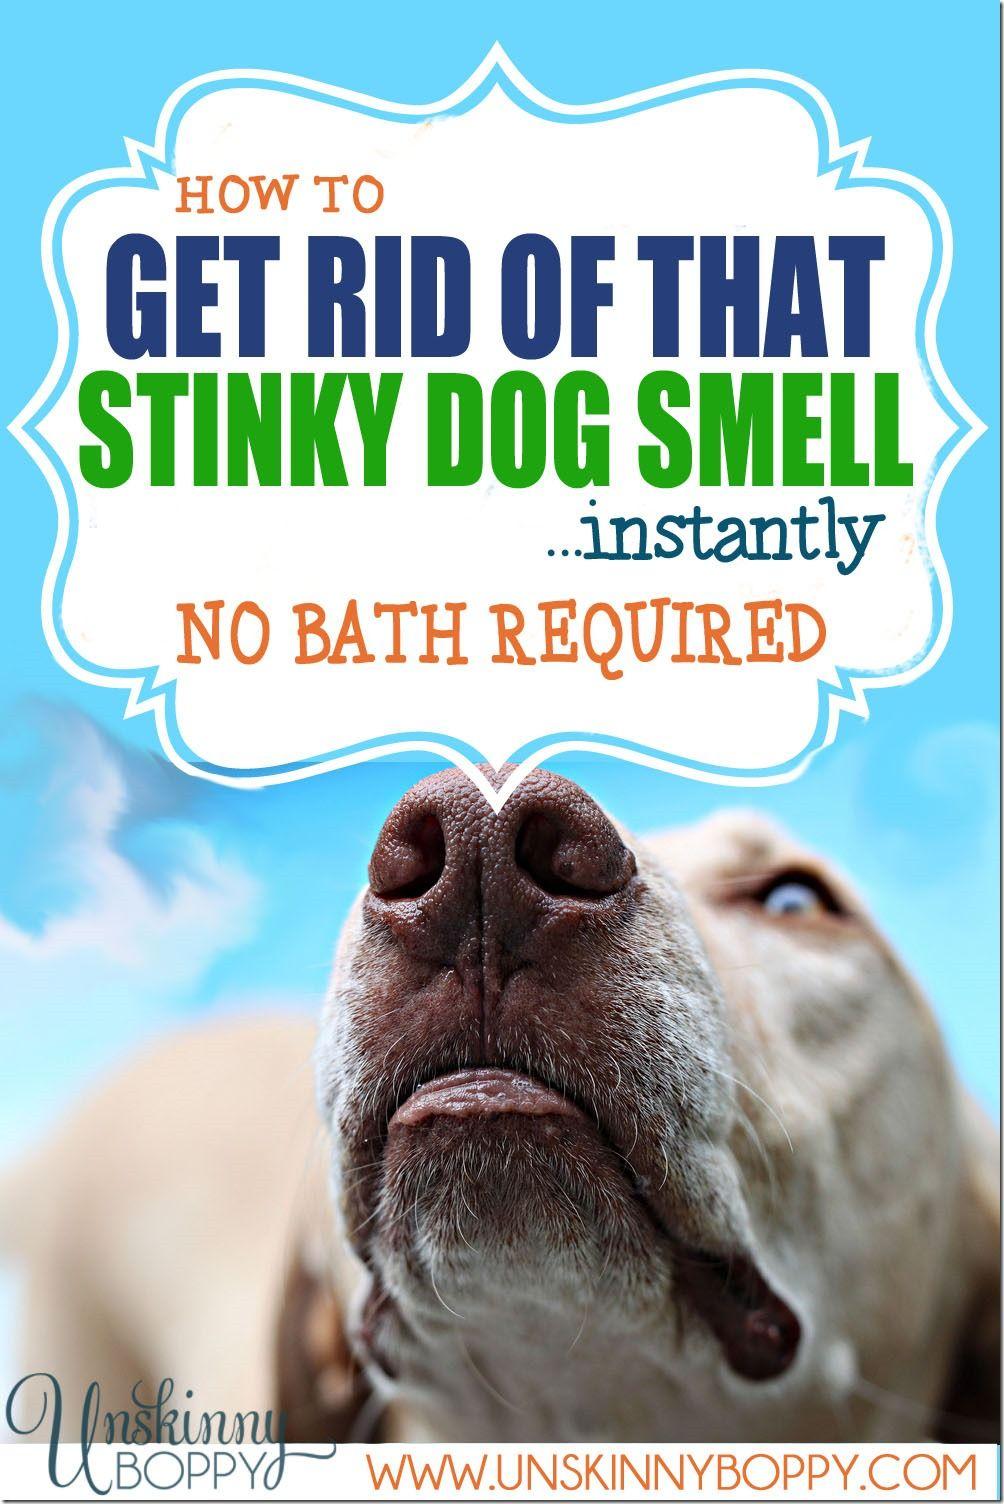 Pixy reccomend Lick odor reek shoes smell smelly sniff stink stinky